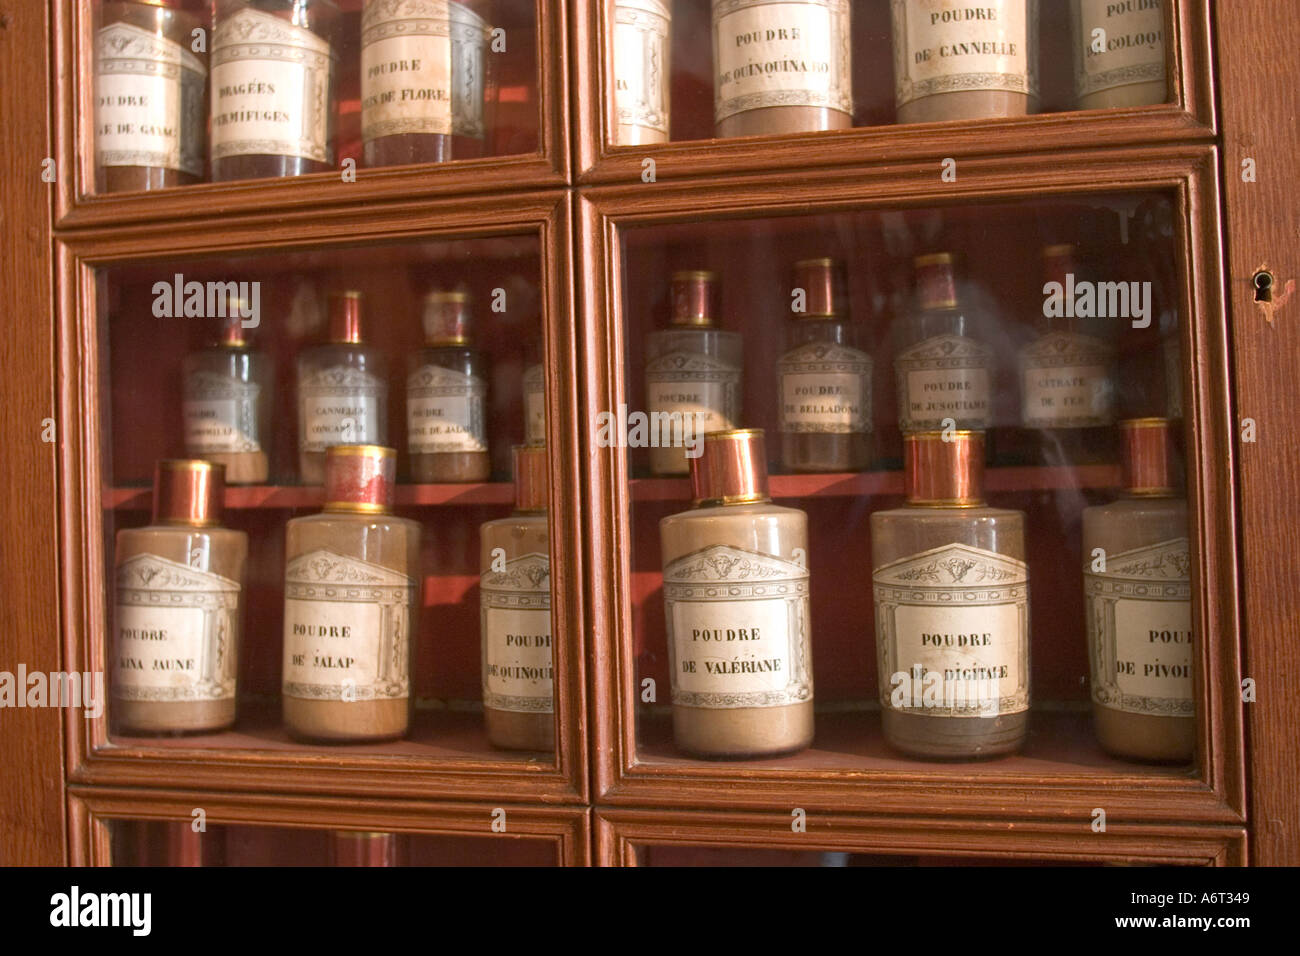 Bottles in the apothecary Hotel Dieu Beaune Burgundy France Stock Photo